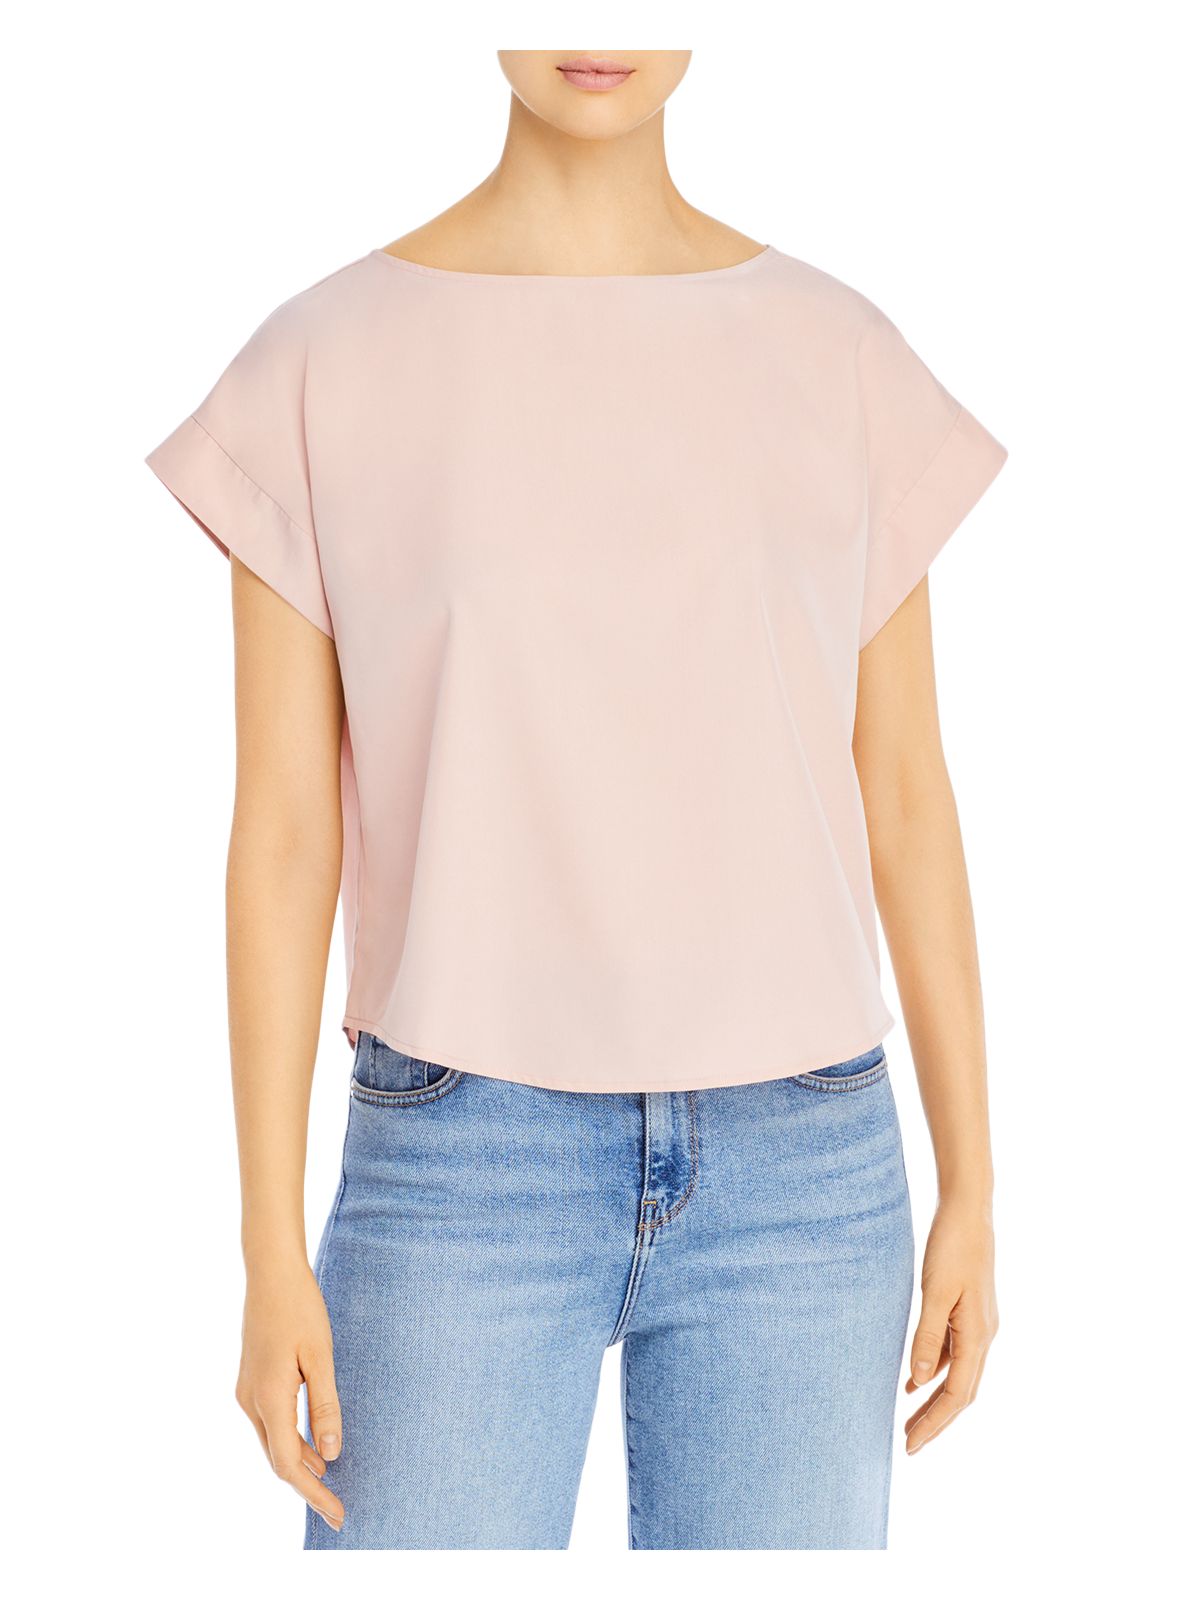 EILEEN FISHER Womens Pink Stretch Cap Sleeve Boat Neck Top L